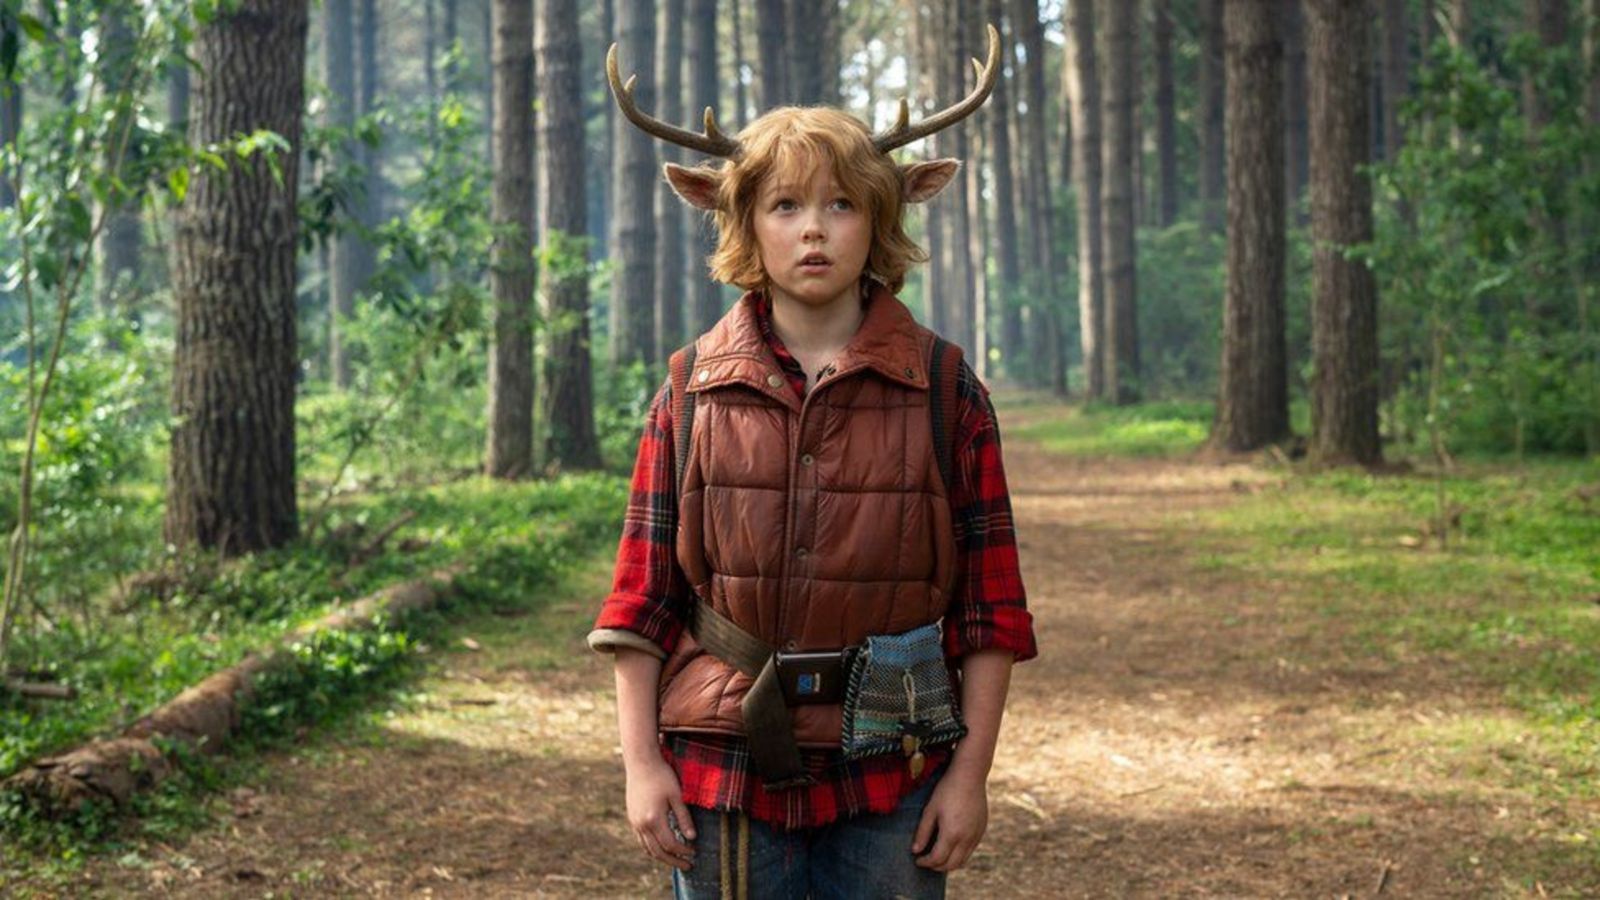 Hybrid human-animal boy with deer horns and ears in woods